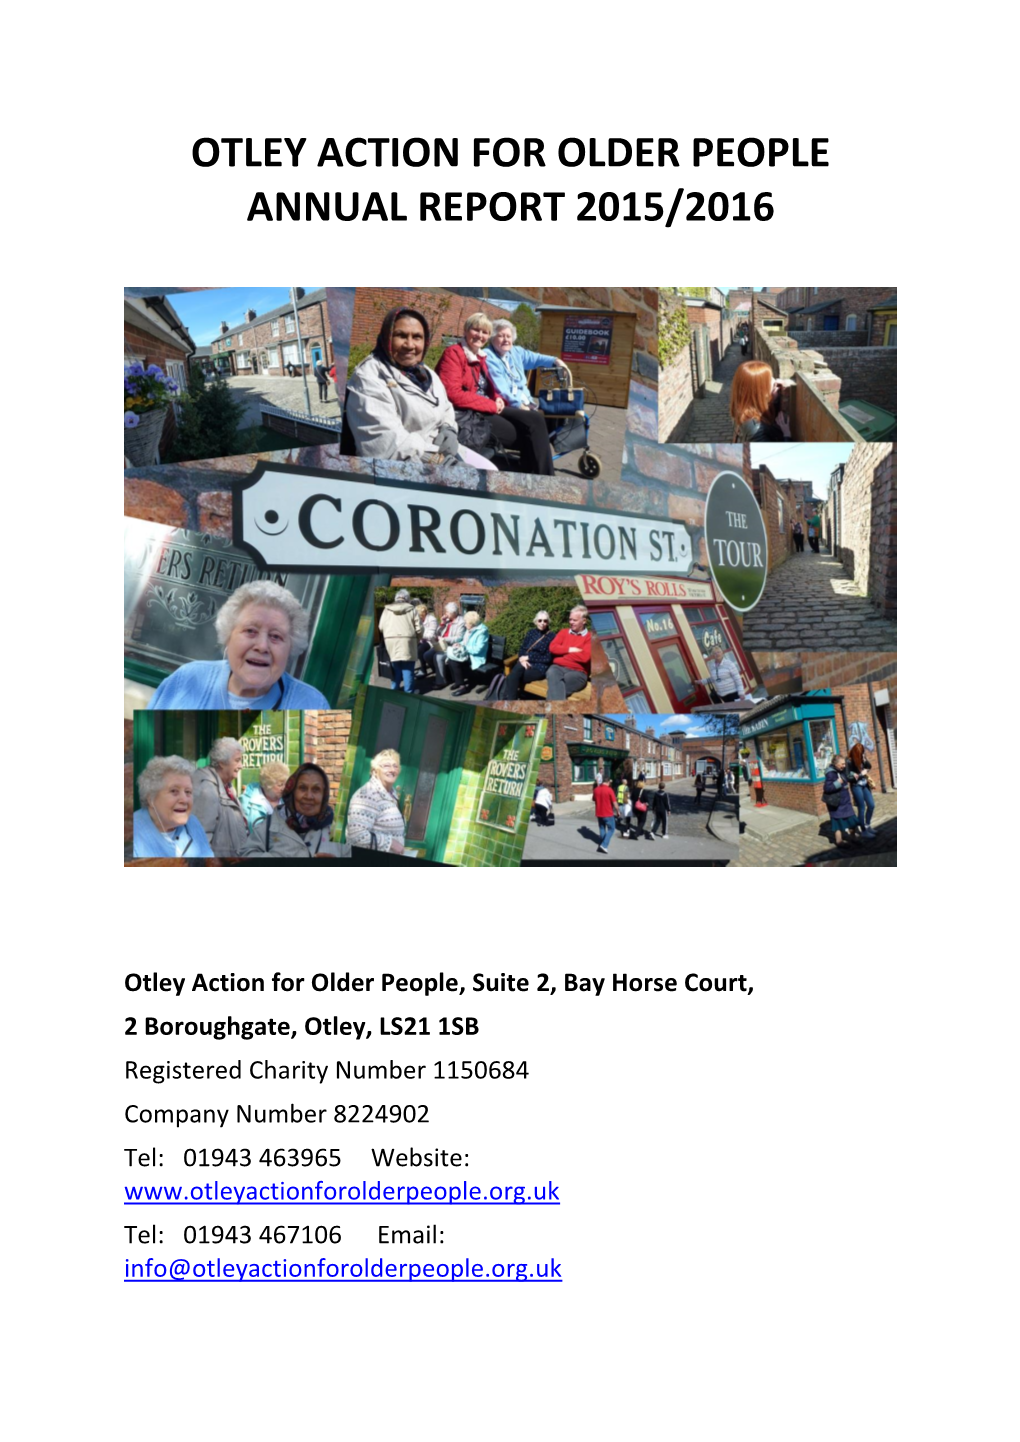 Otley Action for Older People Annual Report 2015/2016